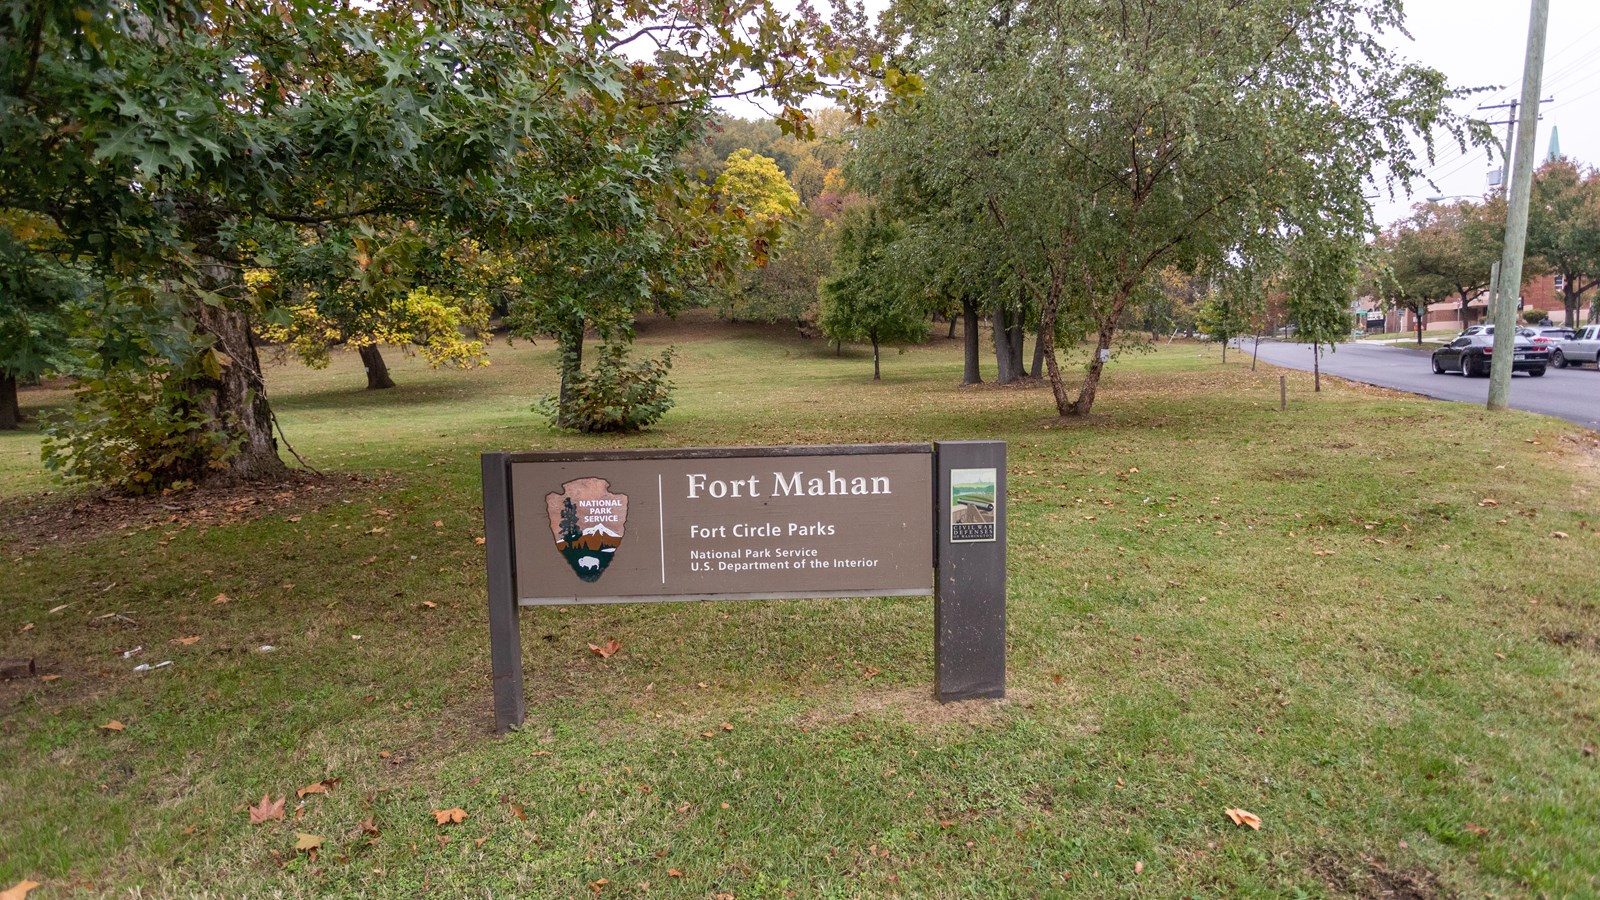 A sign in front of a grassy field